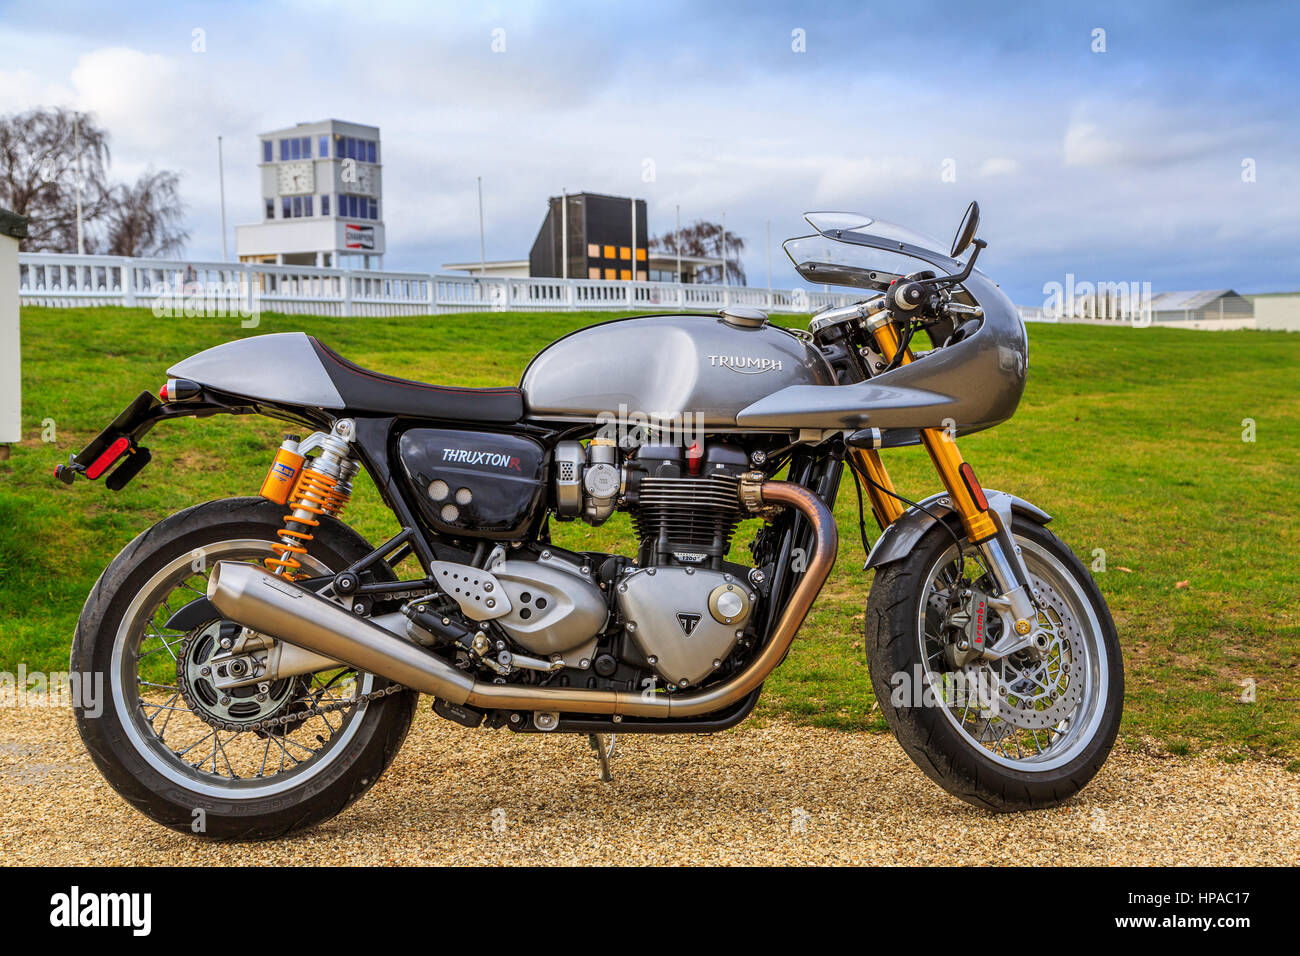 Triumph Thruxton motorcycle parked at Goodwood Circuit, Sussex, England UK Stock Photo